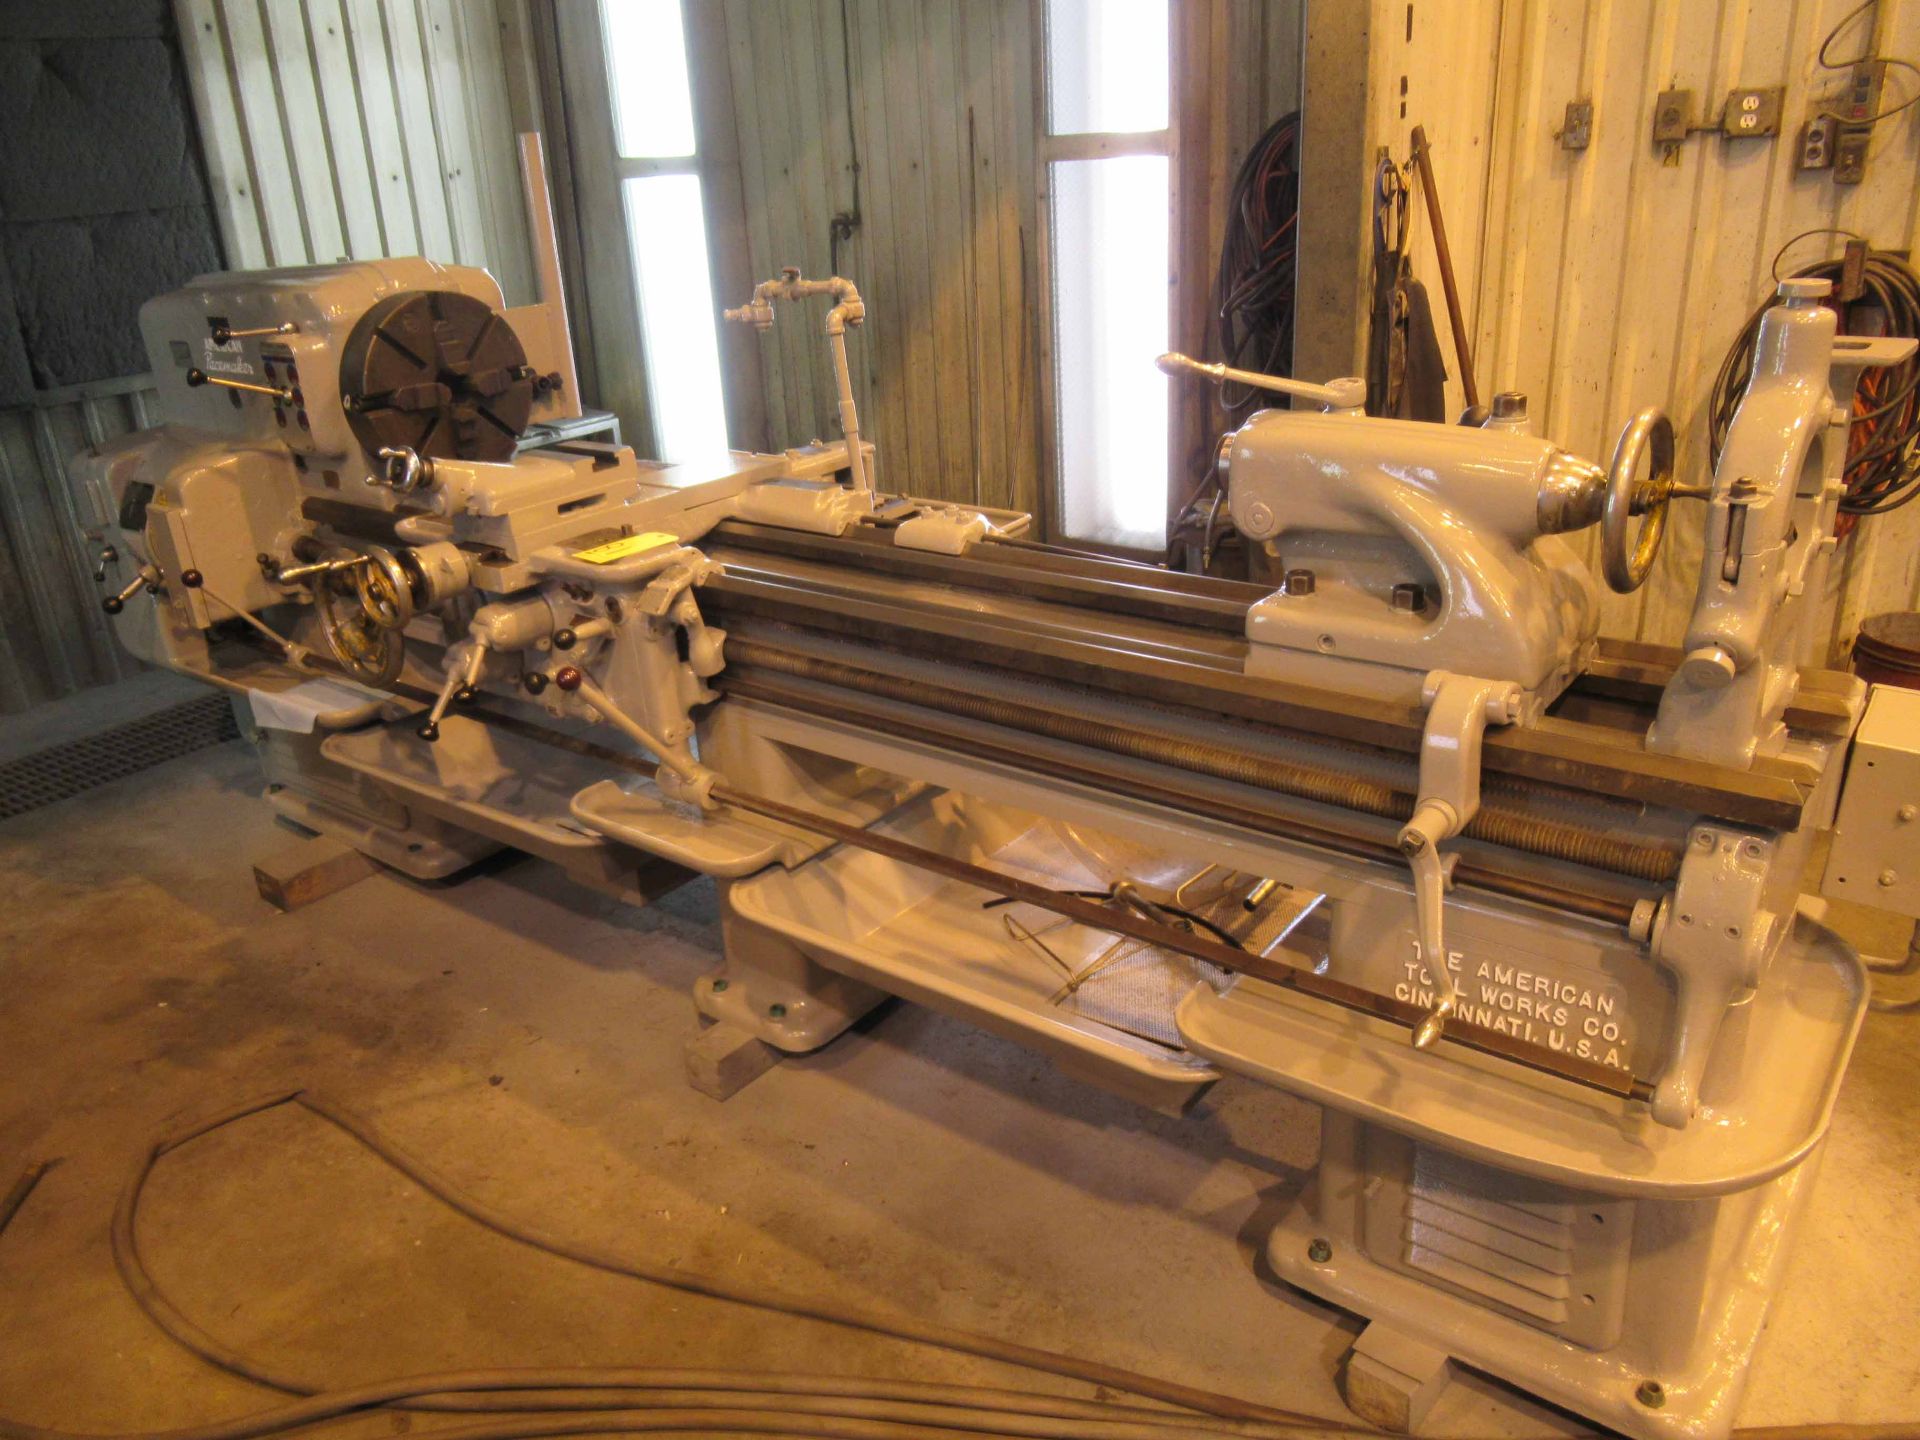 ENGINE LATHE, AMERICAN PACEMAKER 16" X 78", 15" dia 4-jaw chuck, taper, steady rest, spds: 17-1,